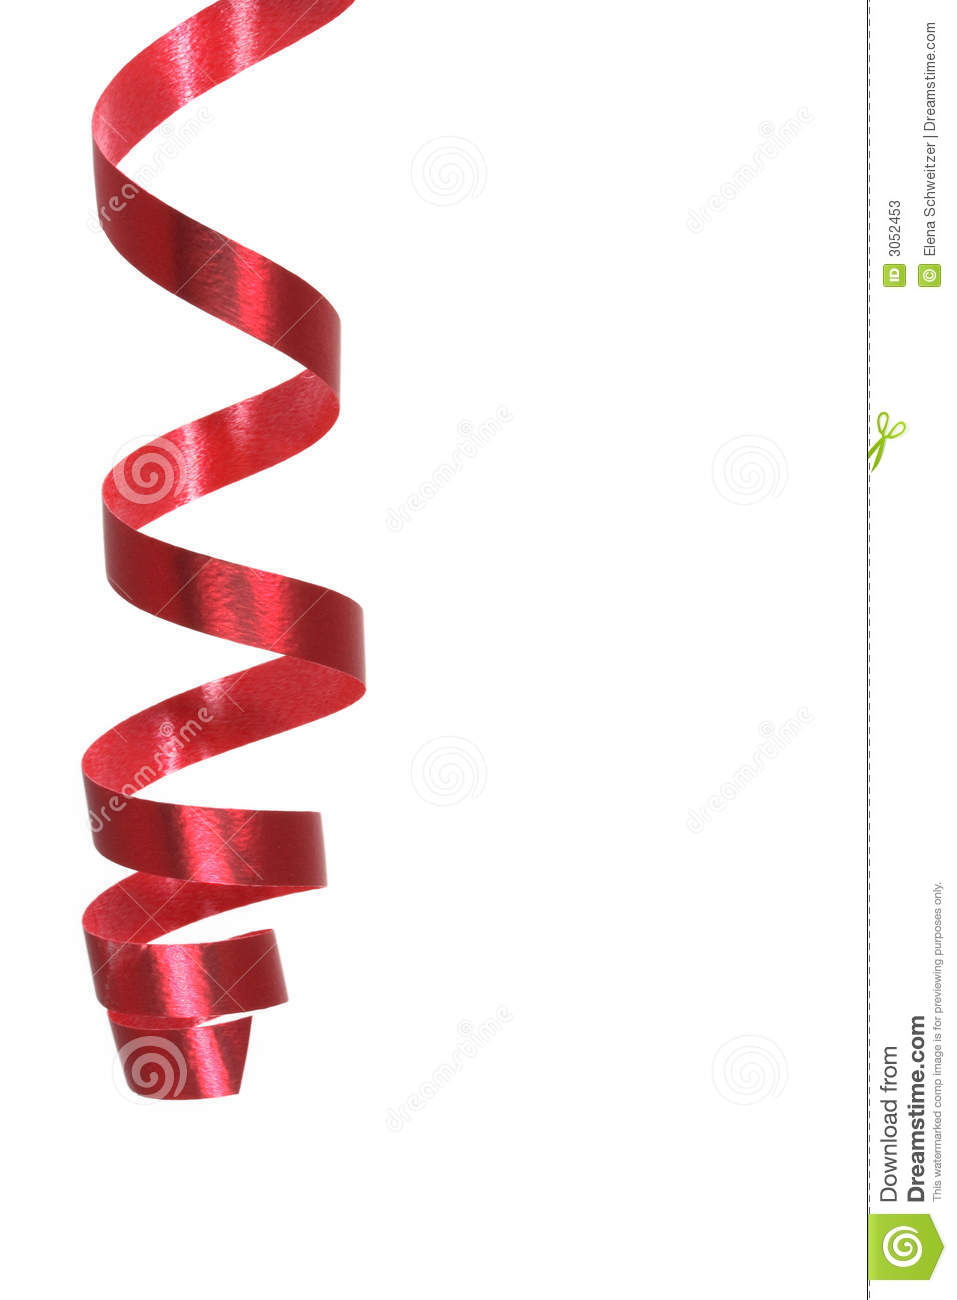 Red Curly Ribbon Stock Photos   Image  3052453